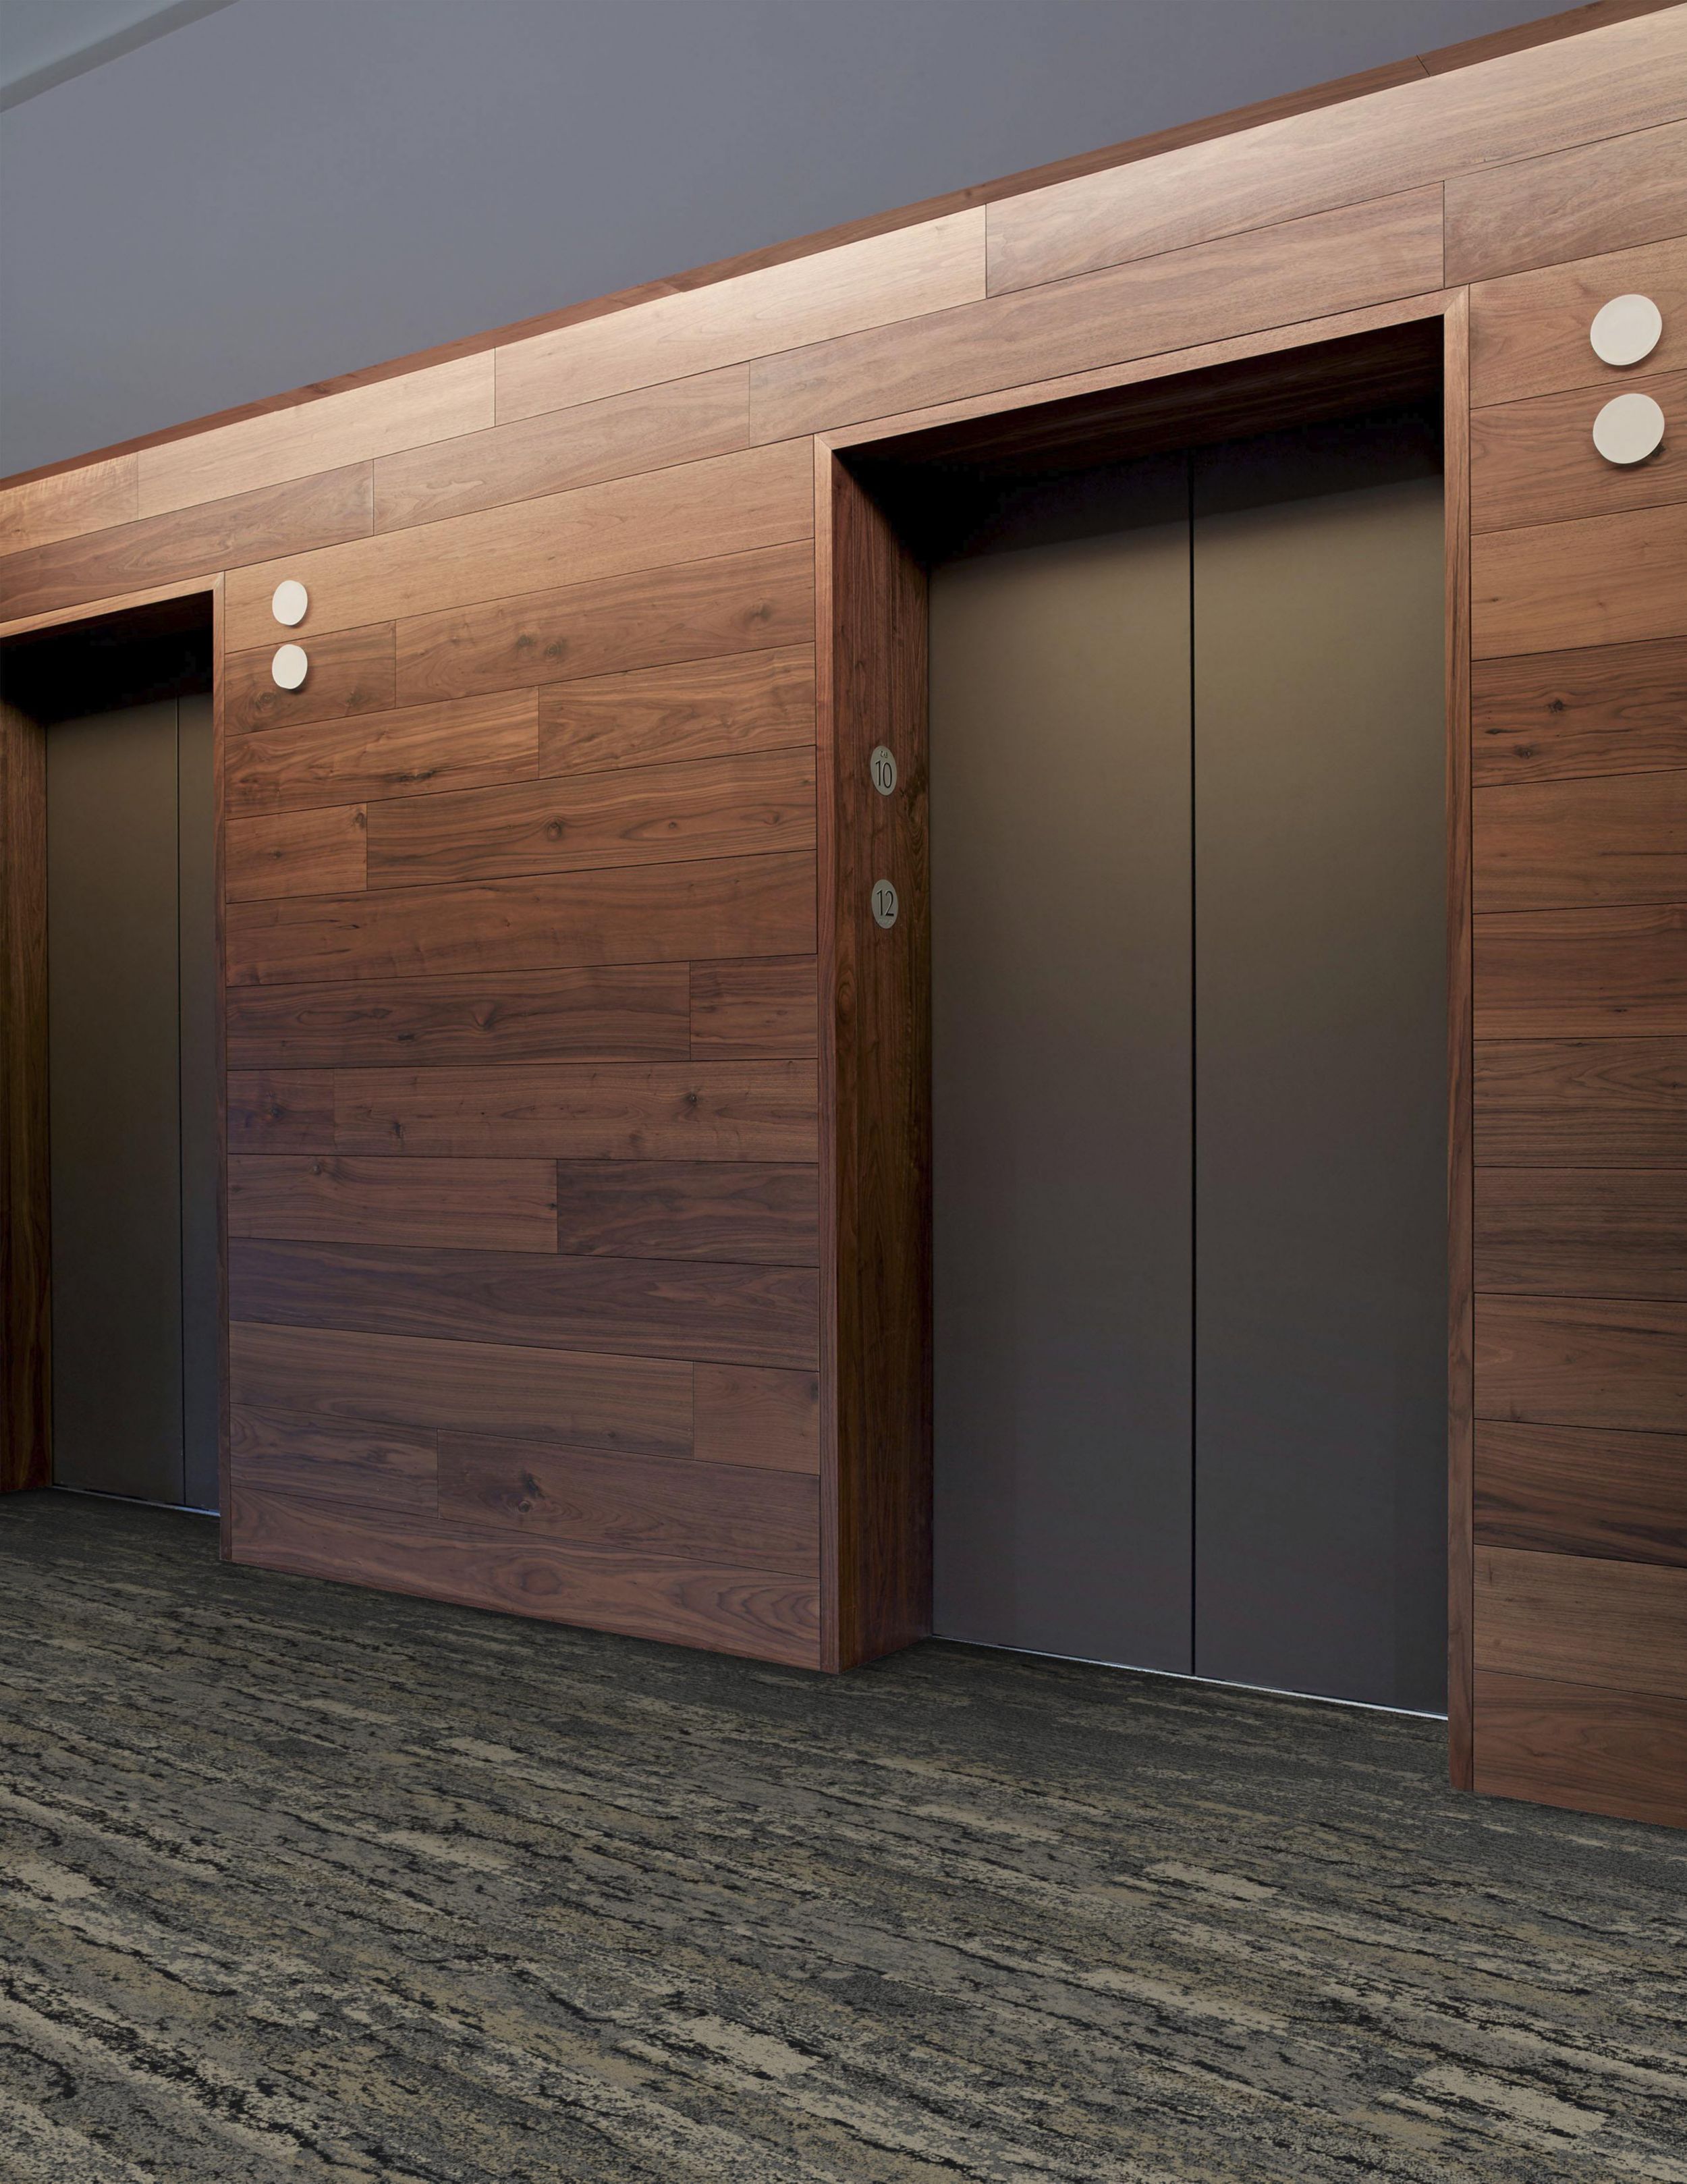 Interface Deeply Rooted and Uprooted plank carpet tile in elevator bank imagen número 3